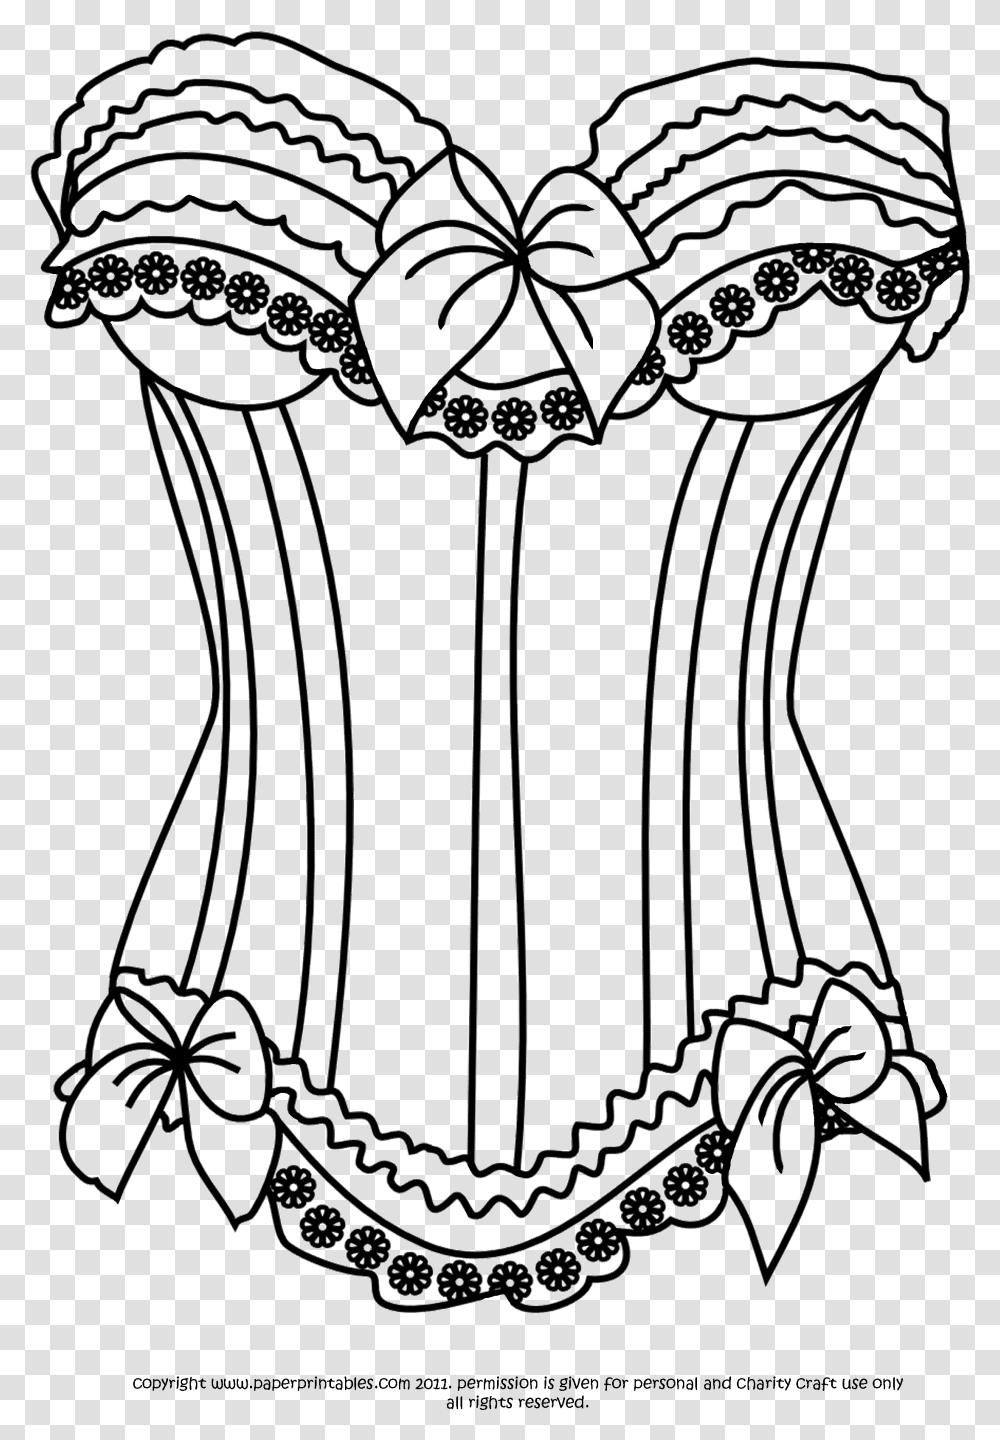 Backing Paper For This Is In Backing Papers Corset Coloring Page, Apparel, Coat, Vest Transparent Png